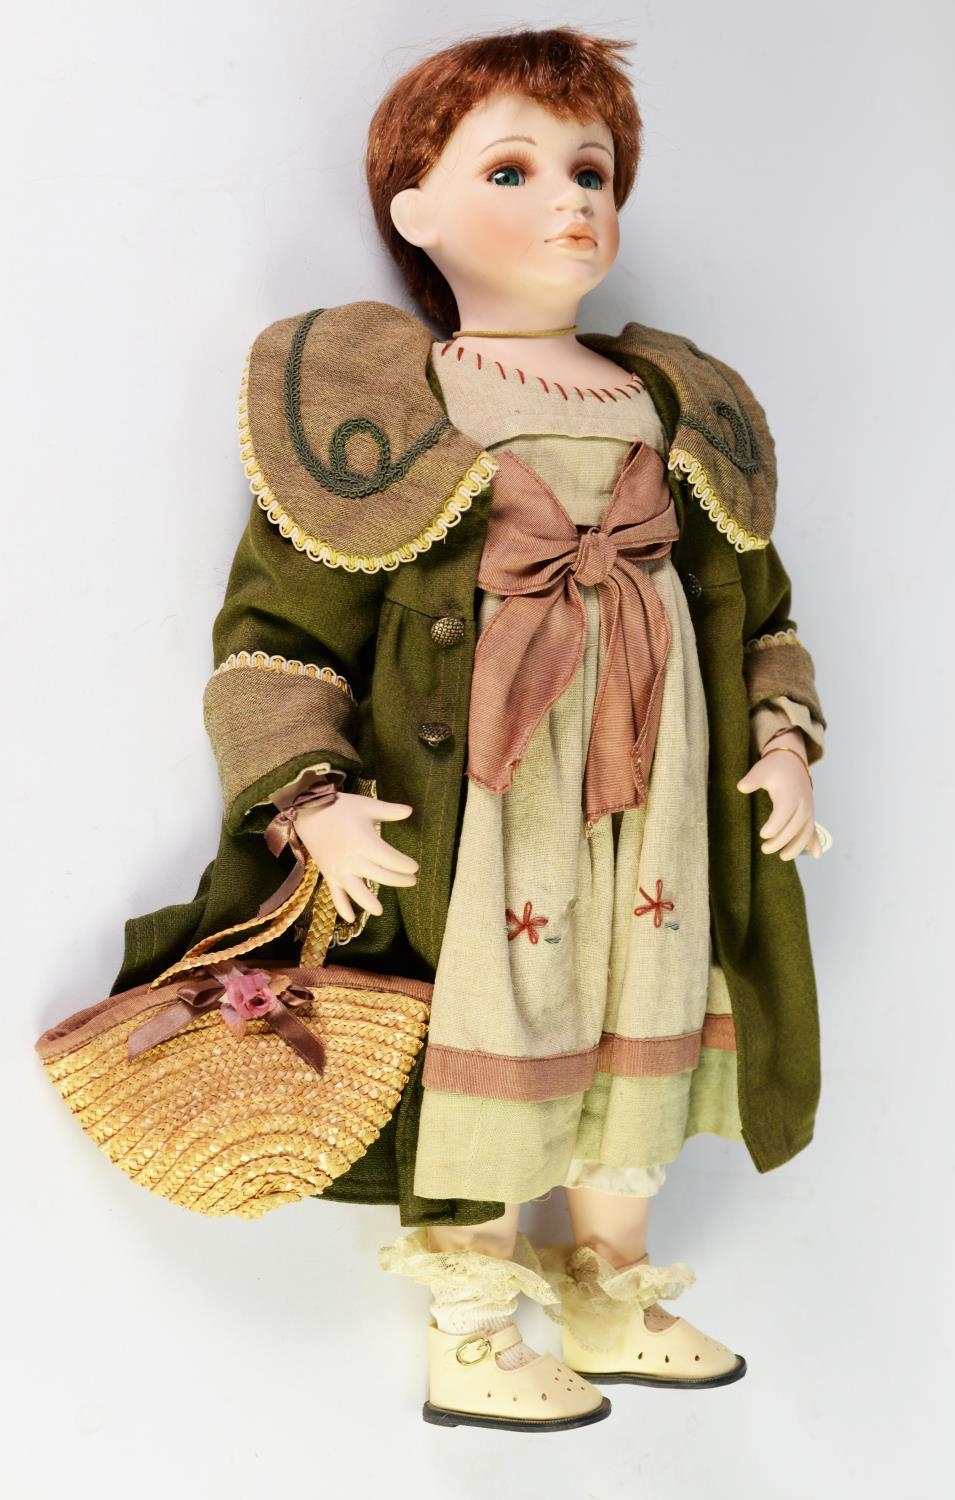 BOXED LEONARDO COLLECTION CERAMIC HEADED COLLECTOR'S DOLL with pigtails and holding a teddy bear, - Image 3 of 4